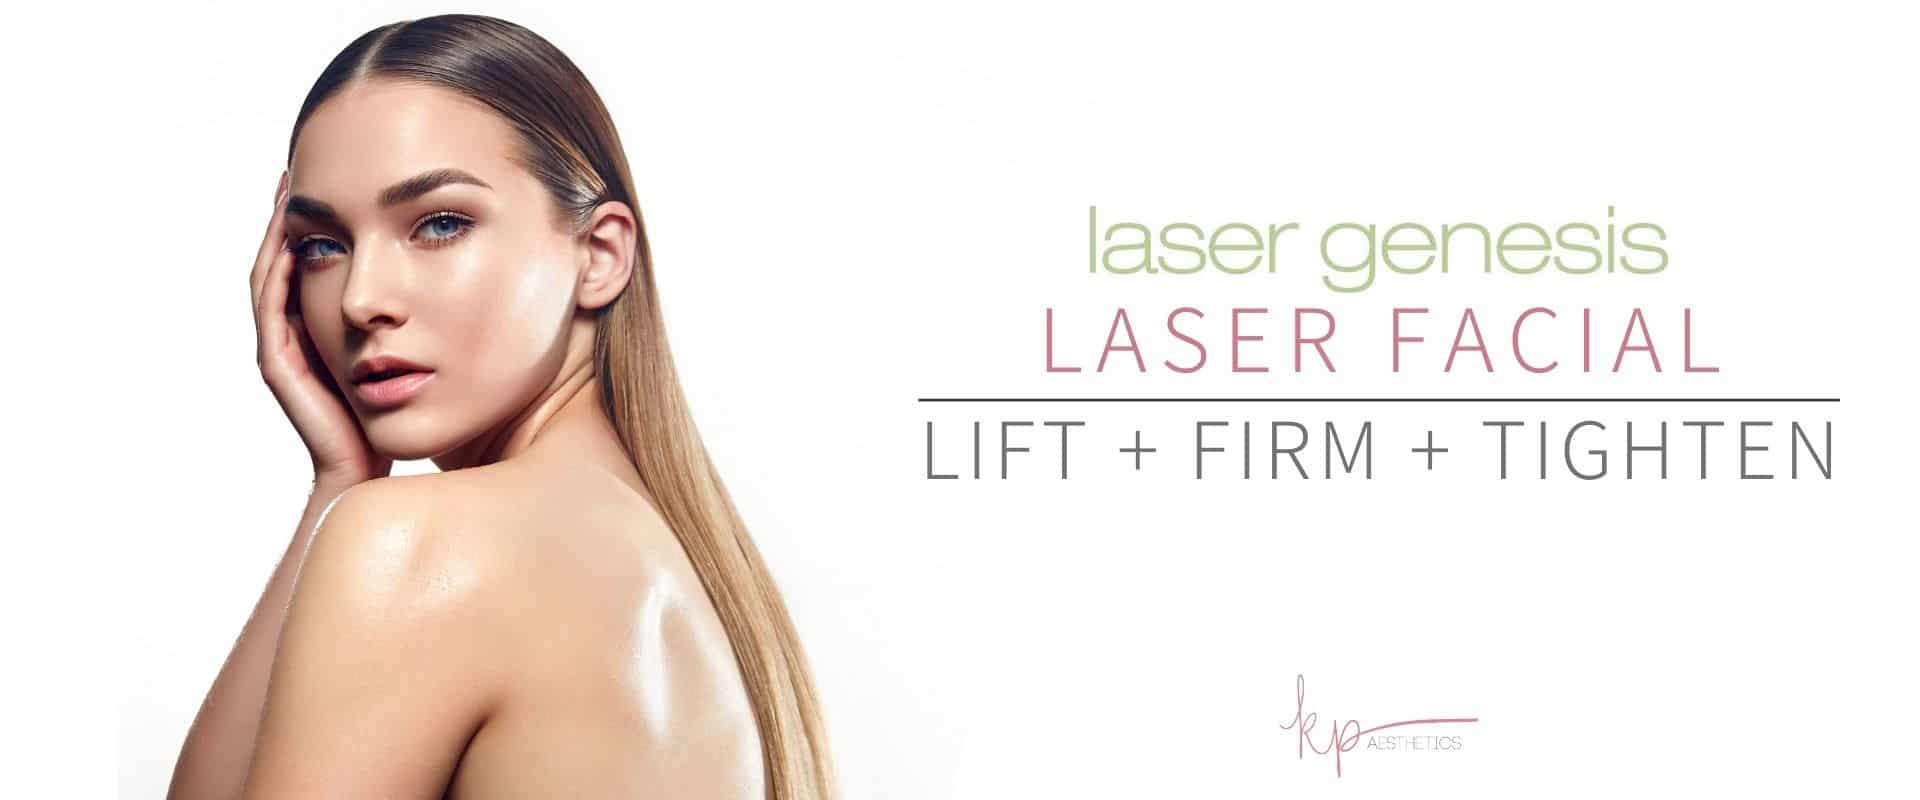 Woman with firm and beautiful skin models her laser facial results.